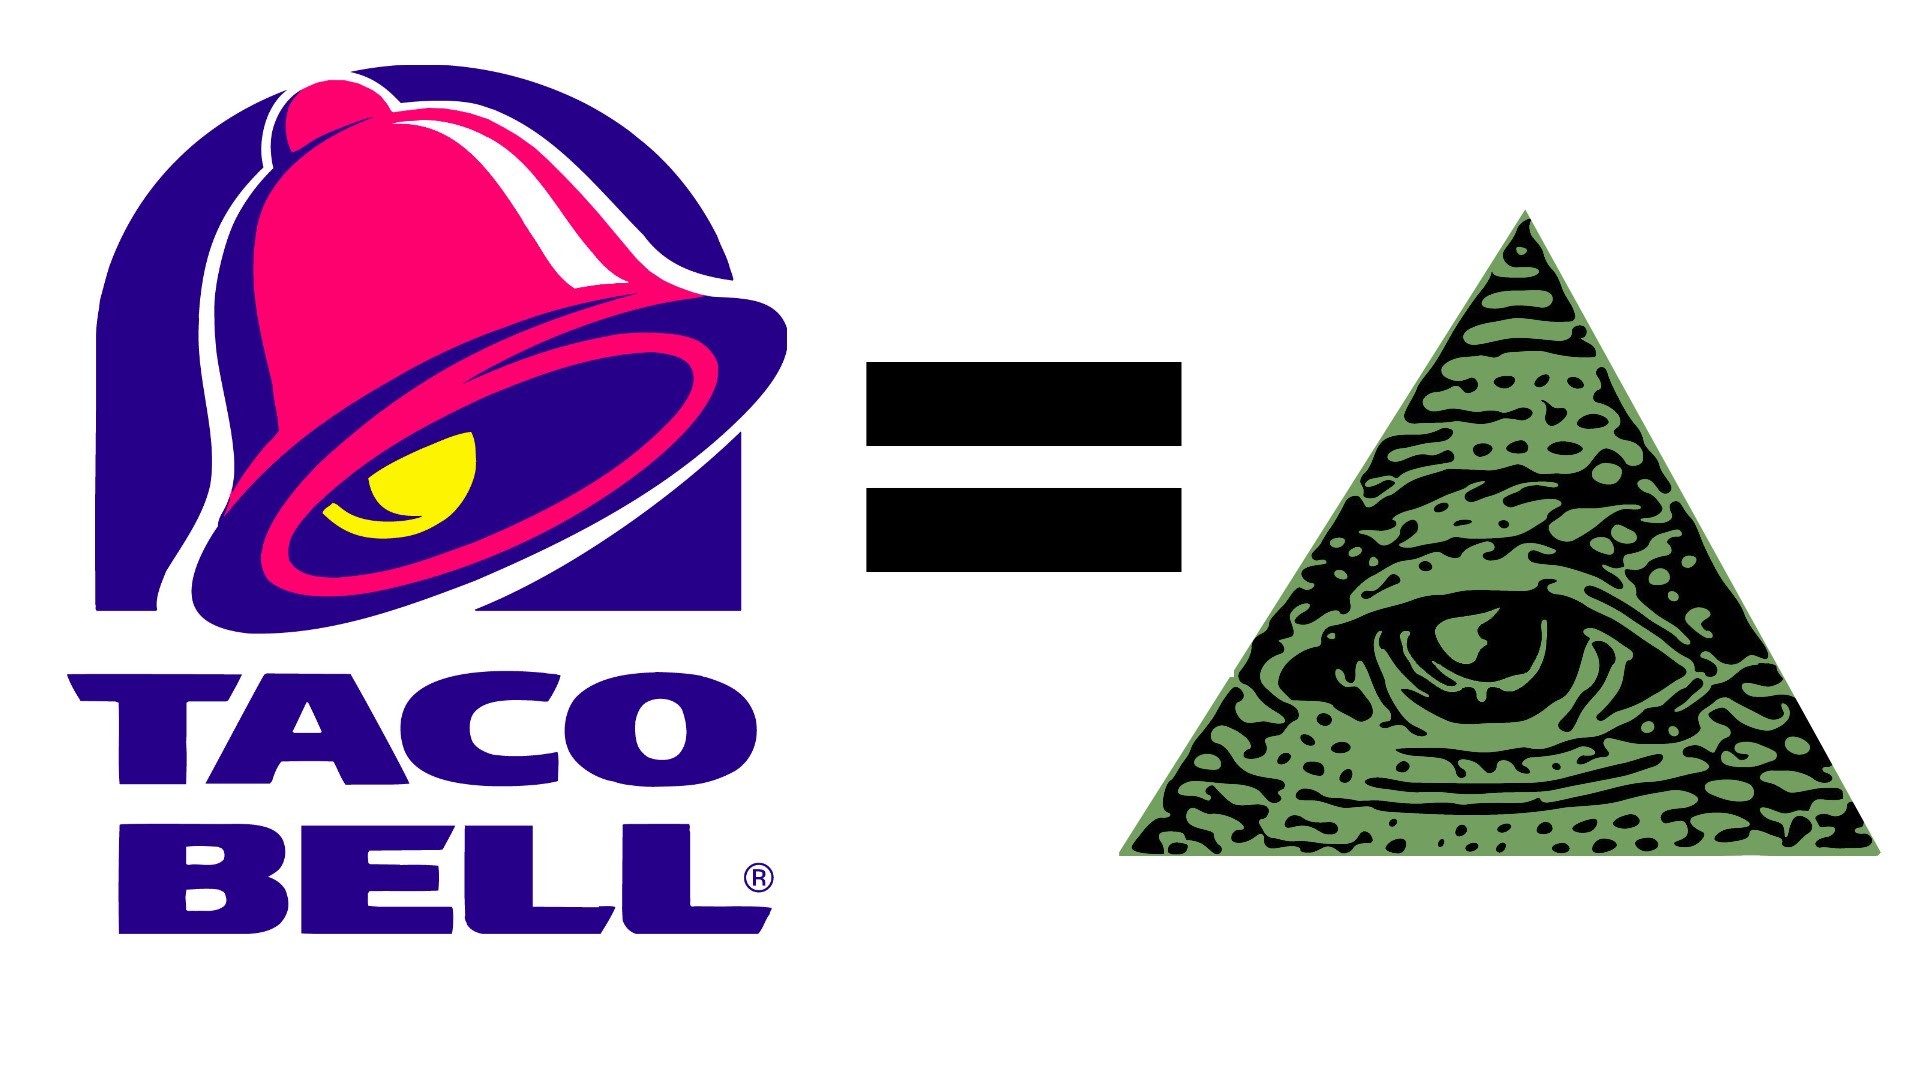 1920x1080 You have done it, ou just spent $100 on Taco Bell! Congrats, I'm proud.